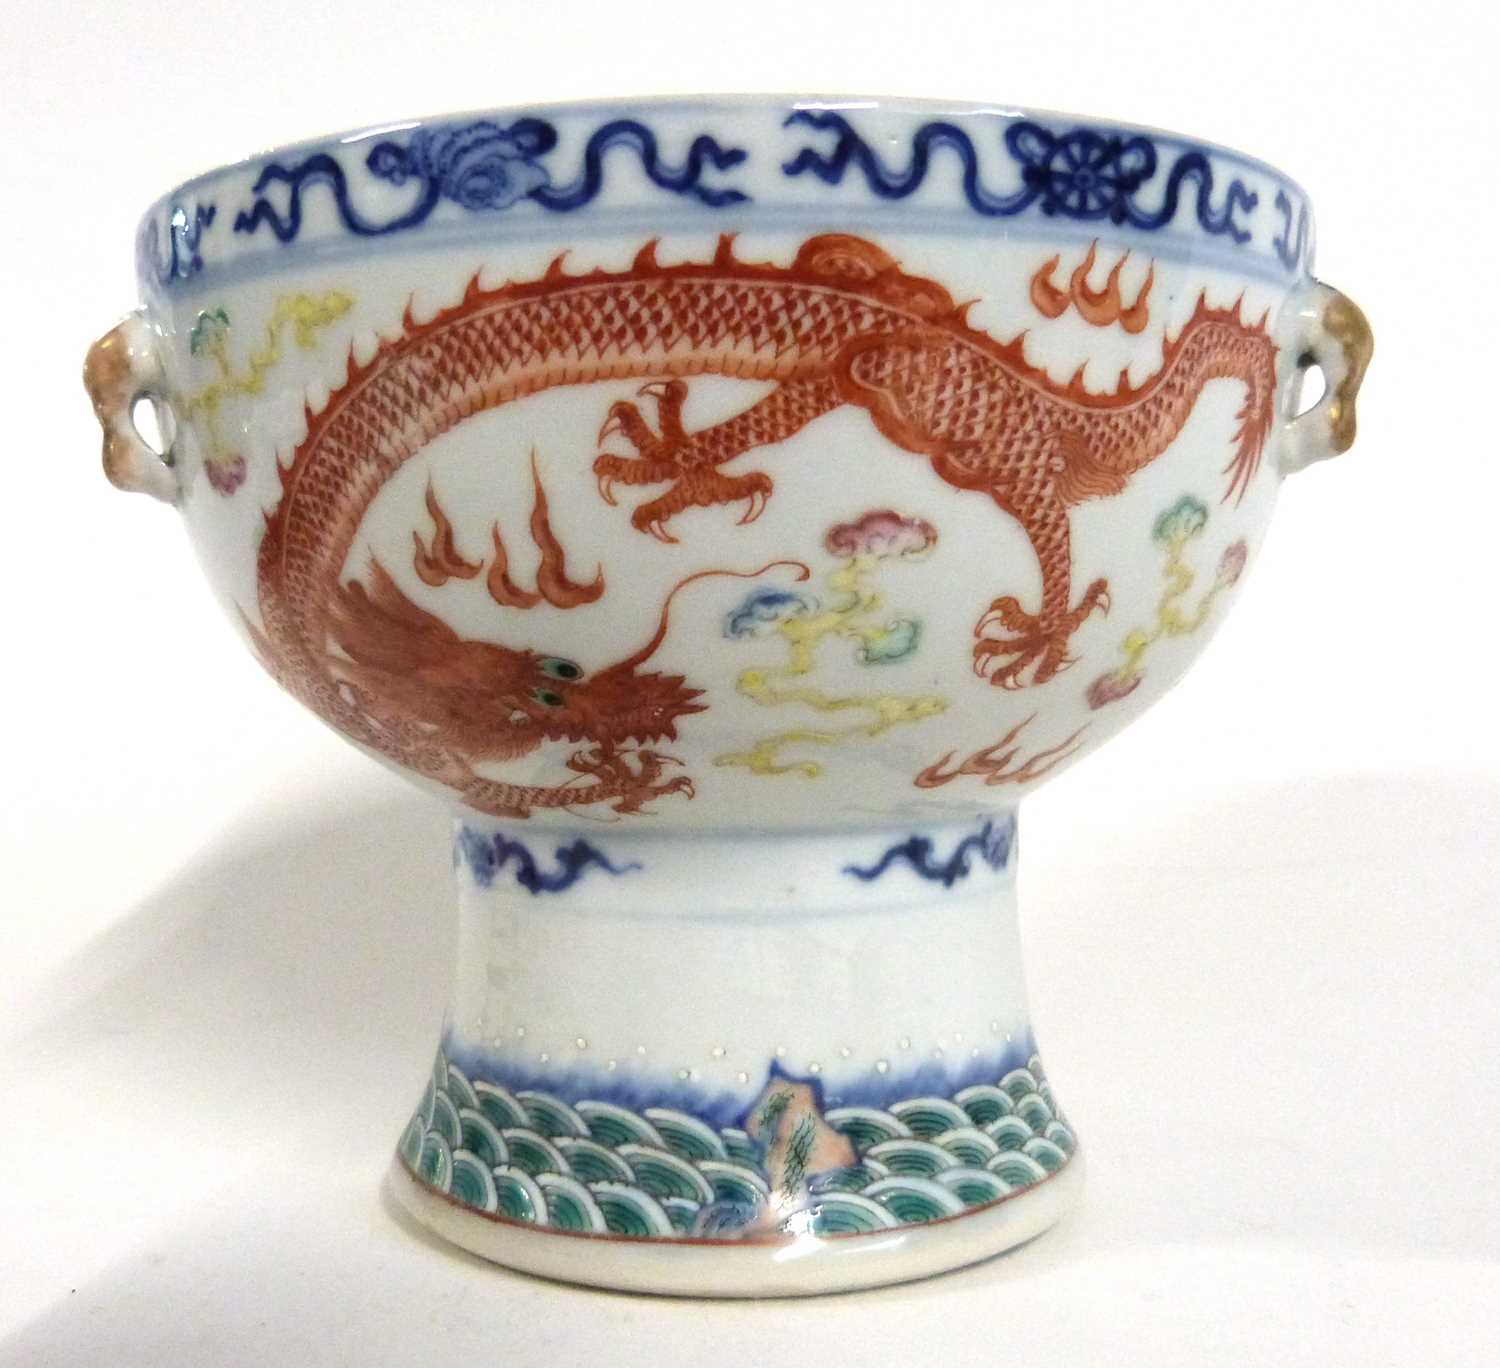 Chinese porcelain stem vase with decoration in iron red of a dragon chasing the flaming pearl - Image 3 of 7